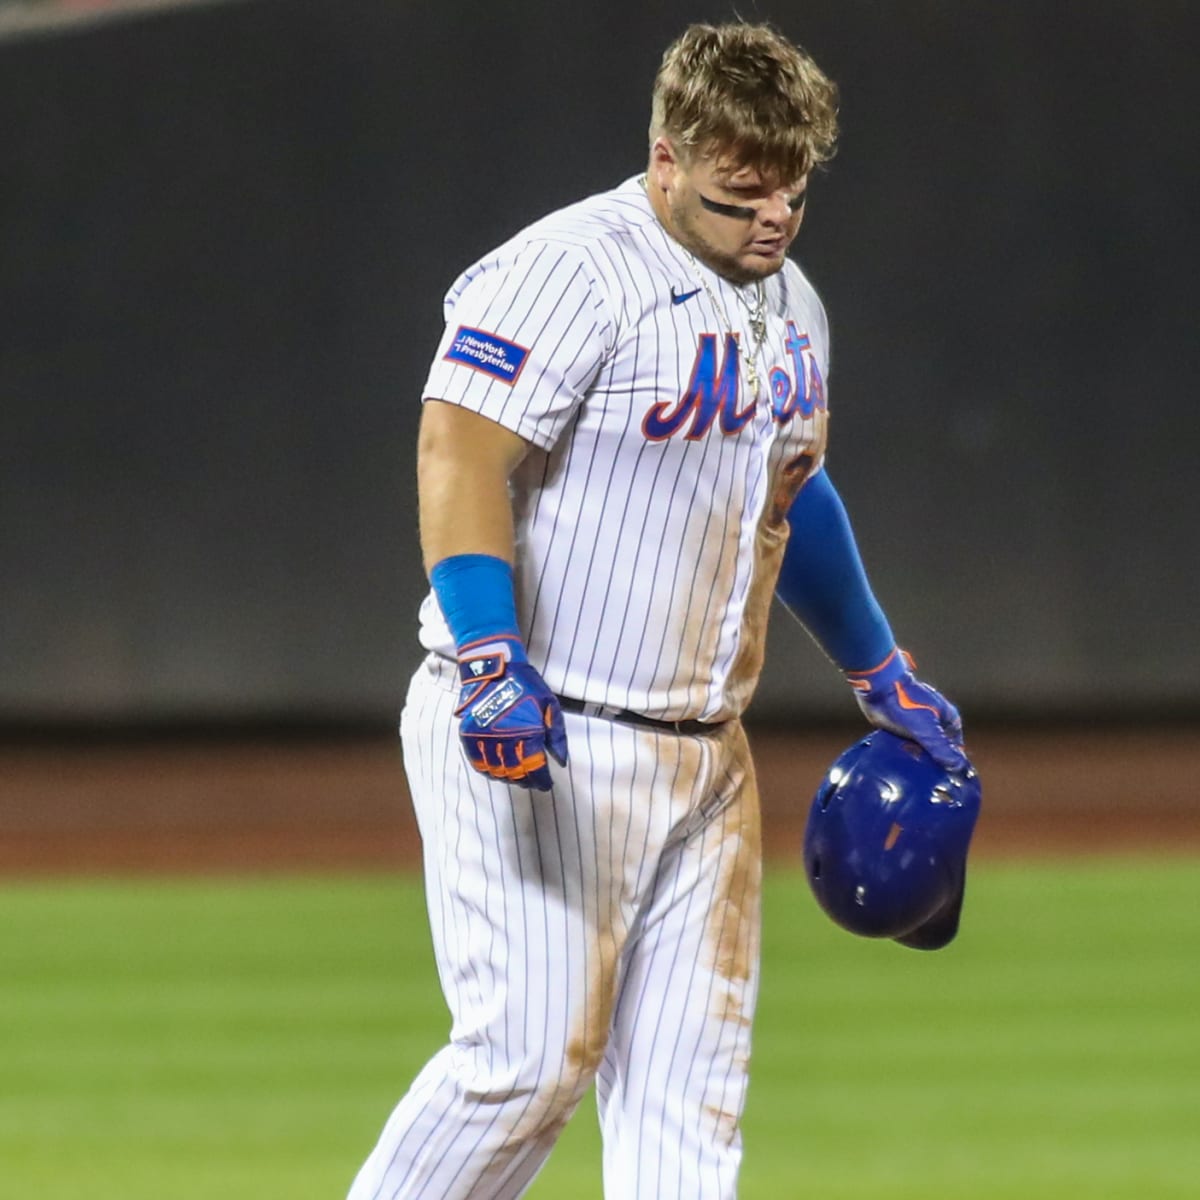 Slimmer Daniel Vogelbach 'ready to do my part' for Mets